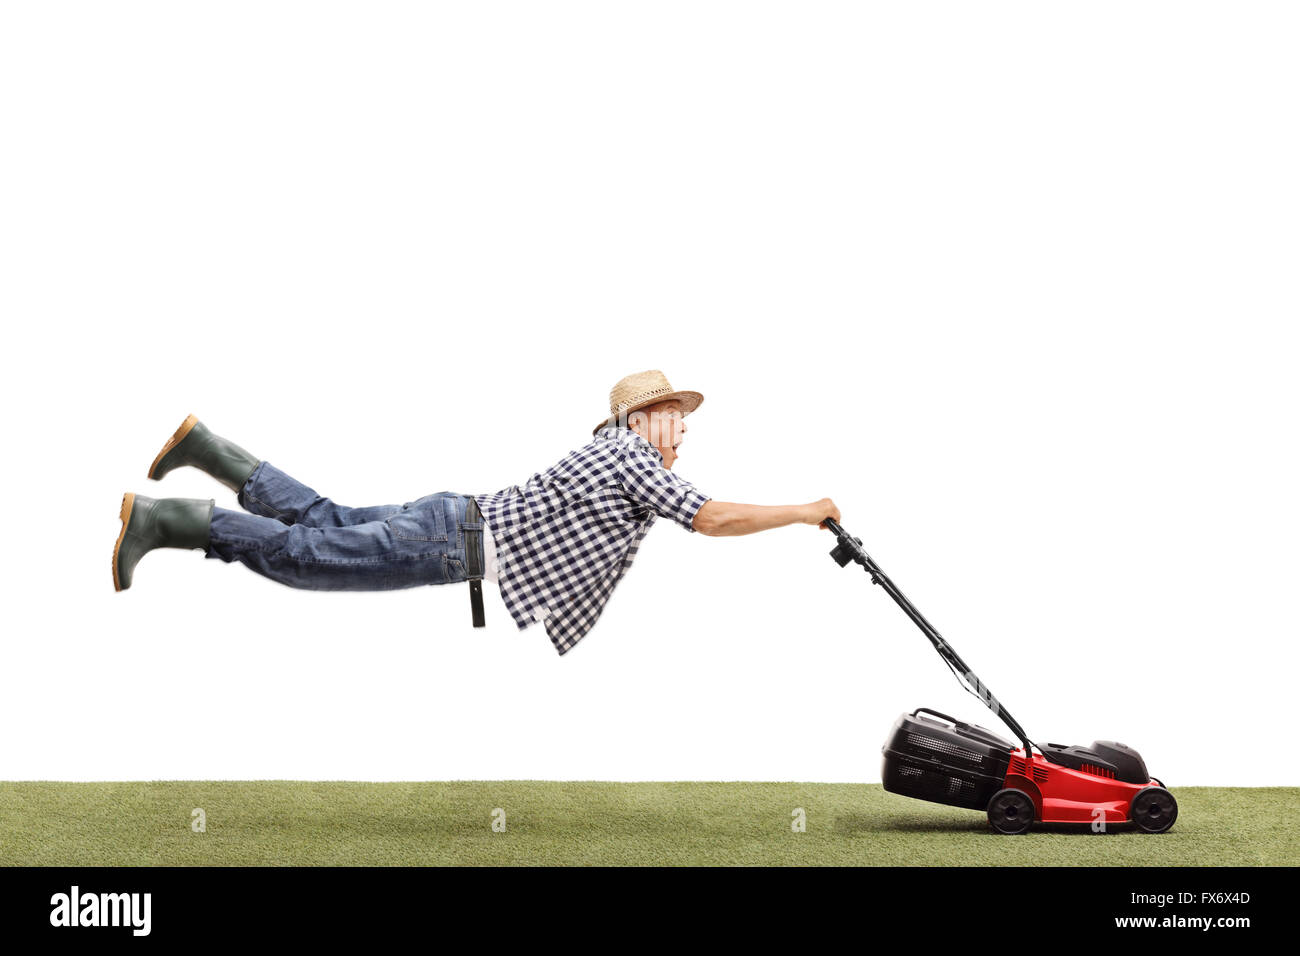 Studio shot of a mature man being pulled by a powerful lawn mower isolated on white background Stock Photo